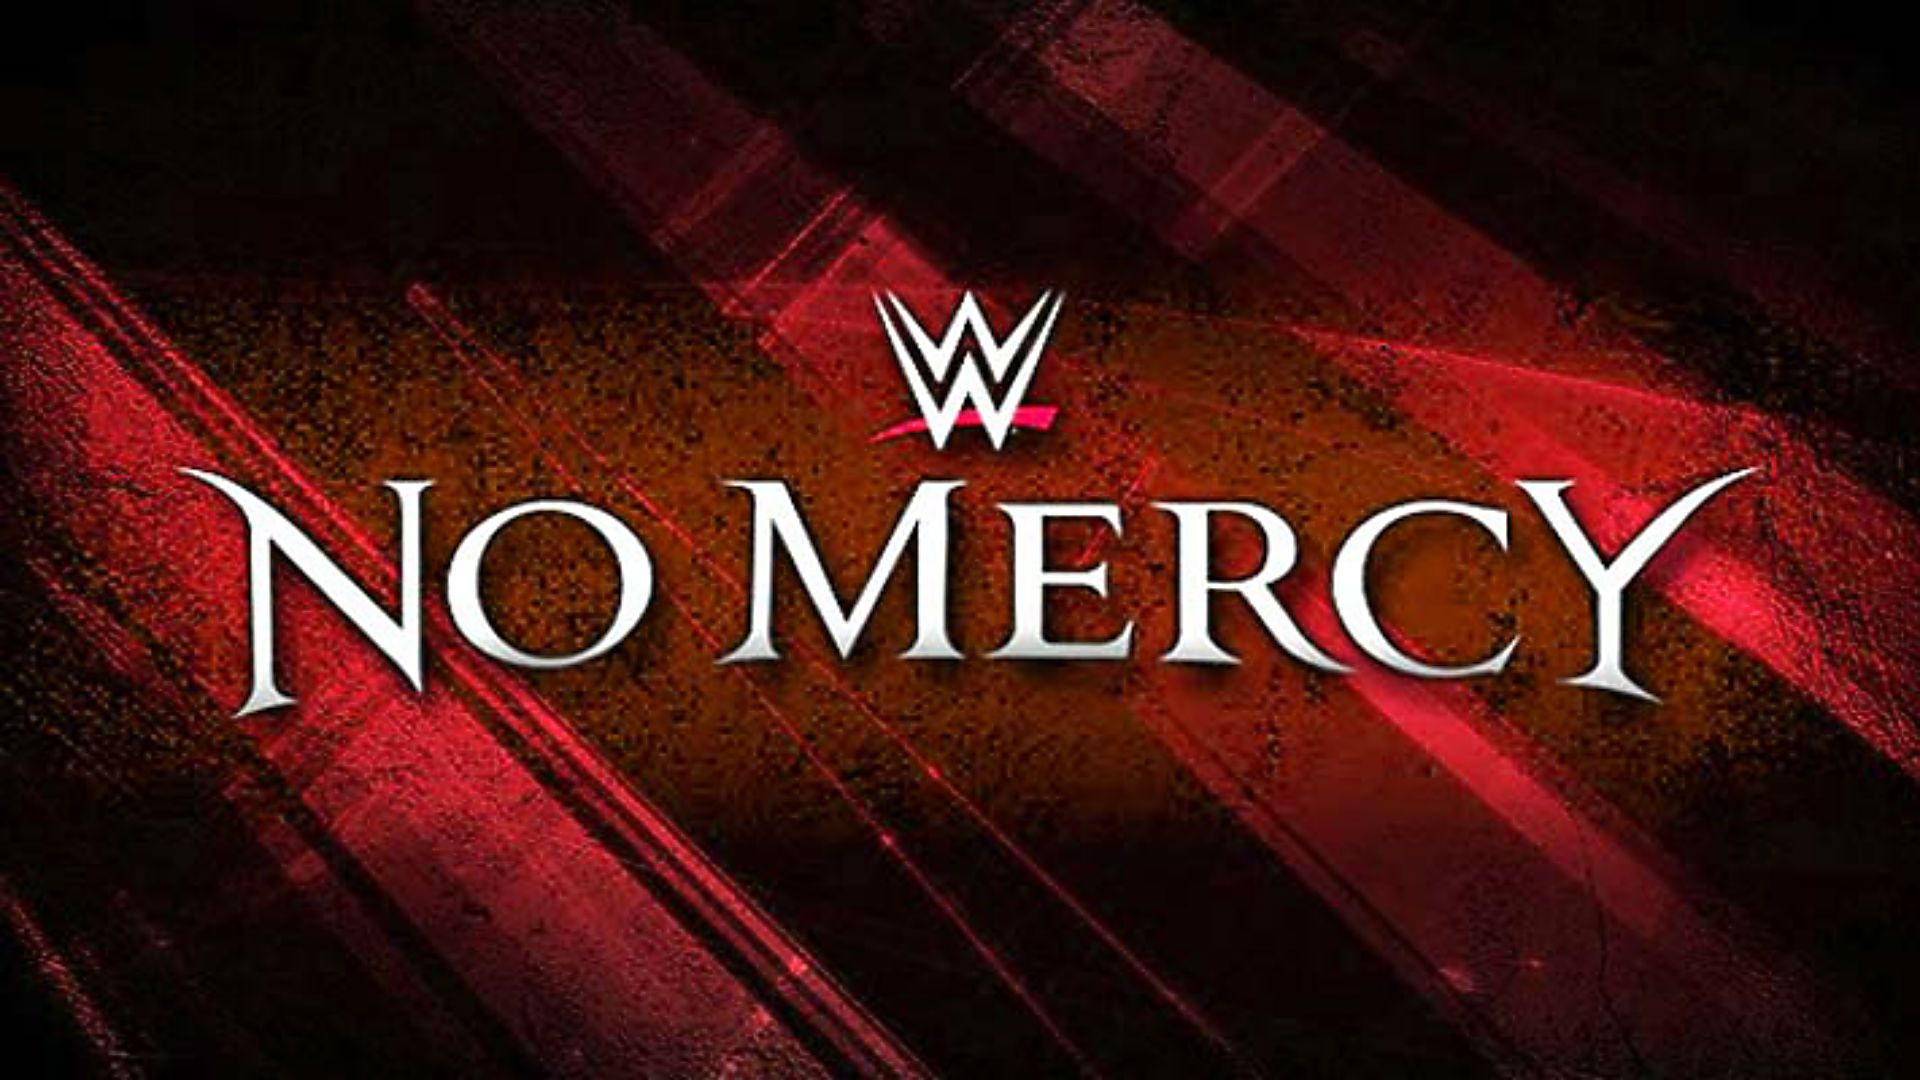 Wwe No Mercy 2017 Results - Graphic Design - HD Wallpaper 